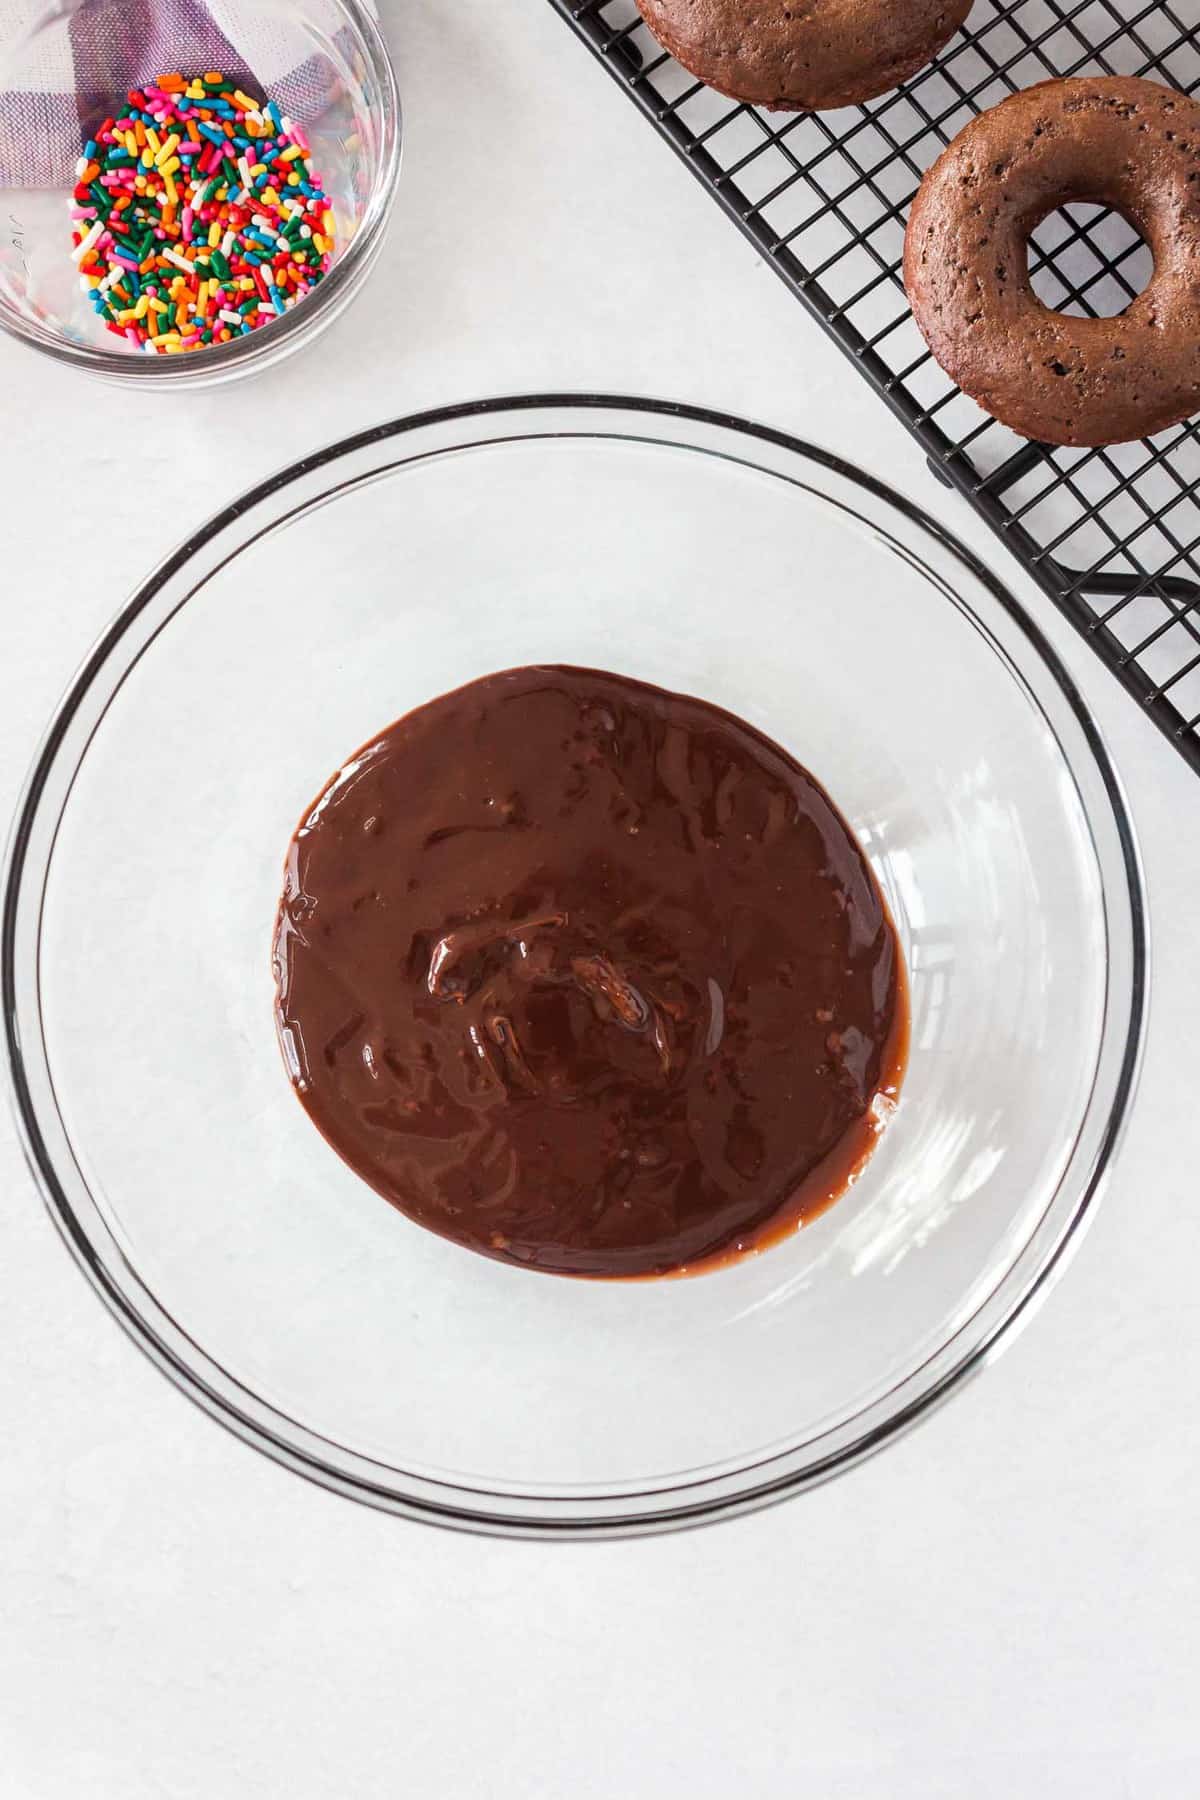 Chocolate glaze in a glass mixing bowl.